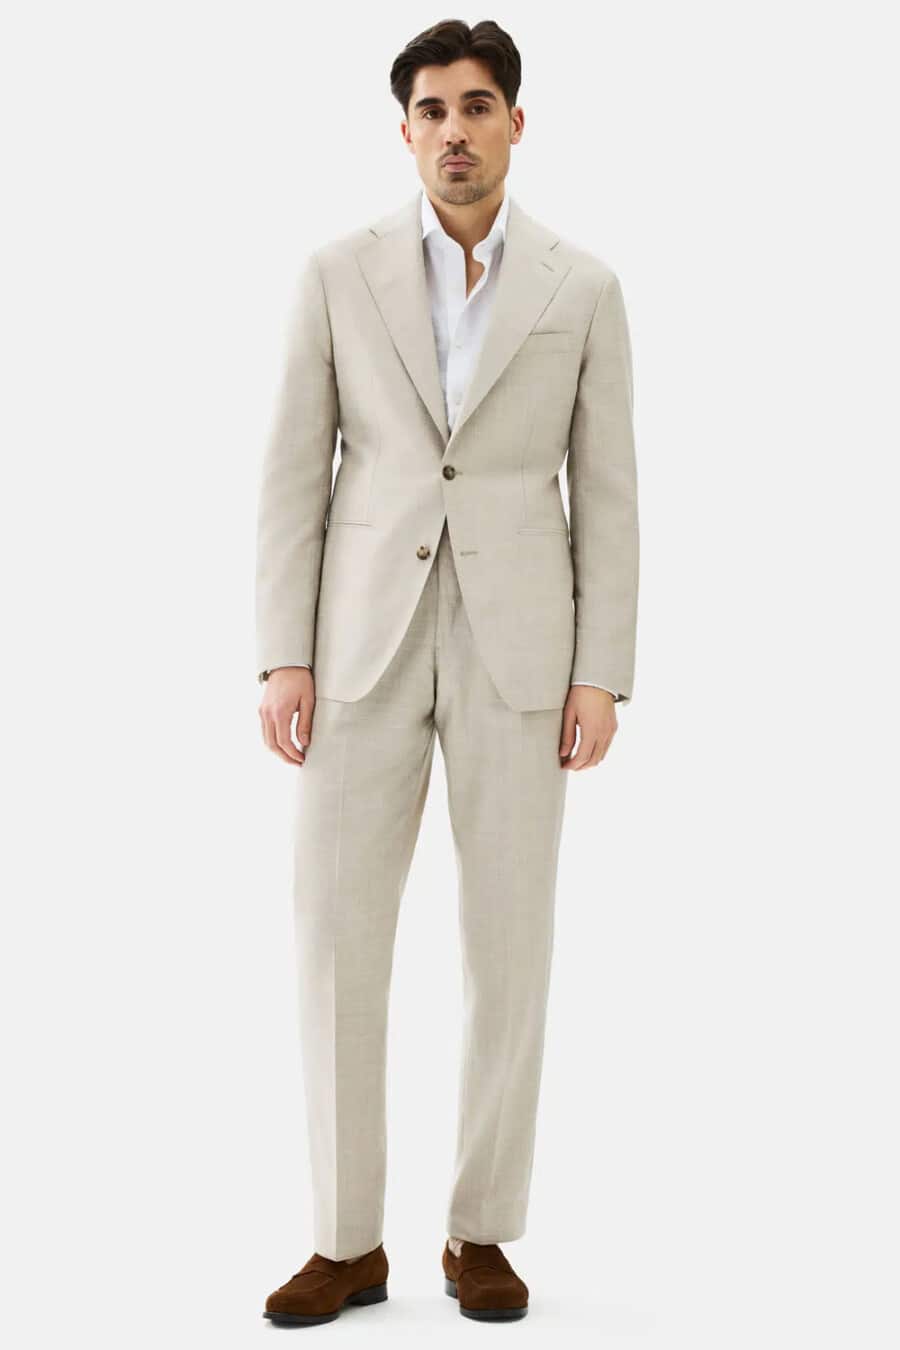 Men's off-white suit, white shirt and brown suede penny loafers outfit